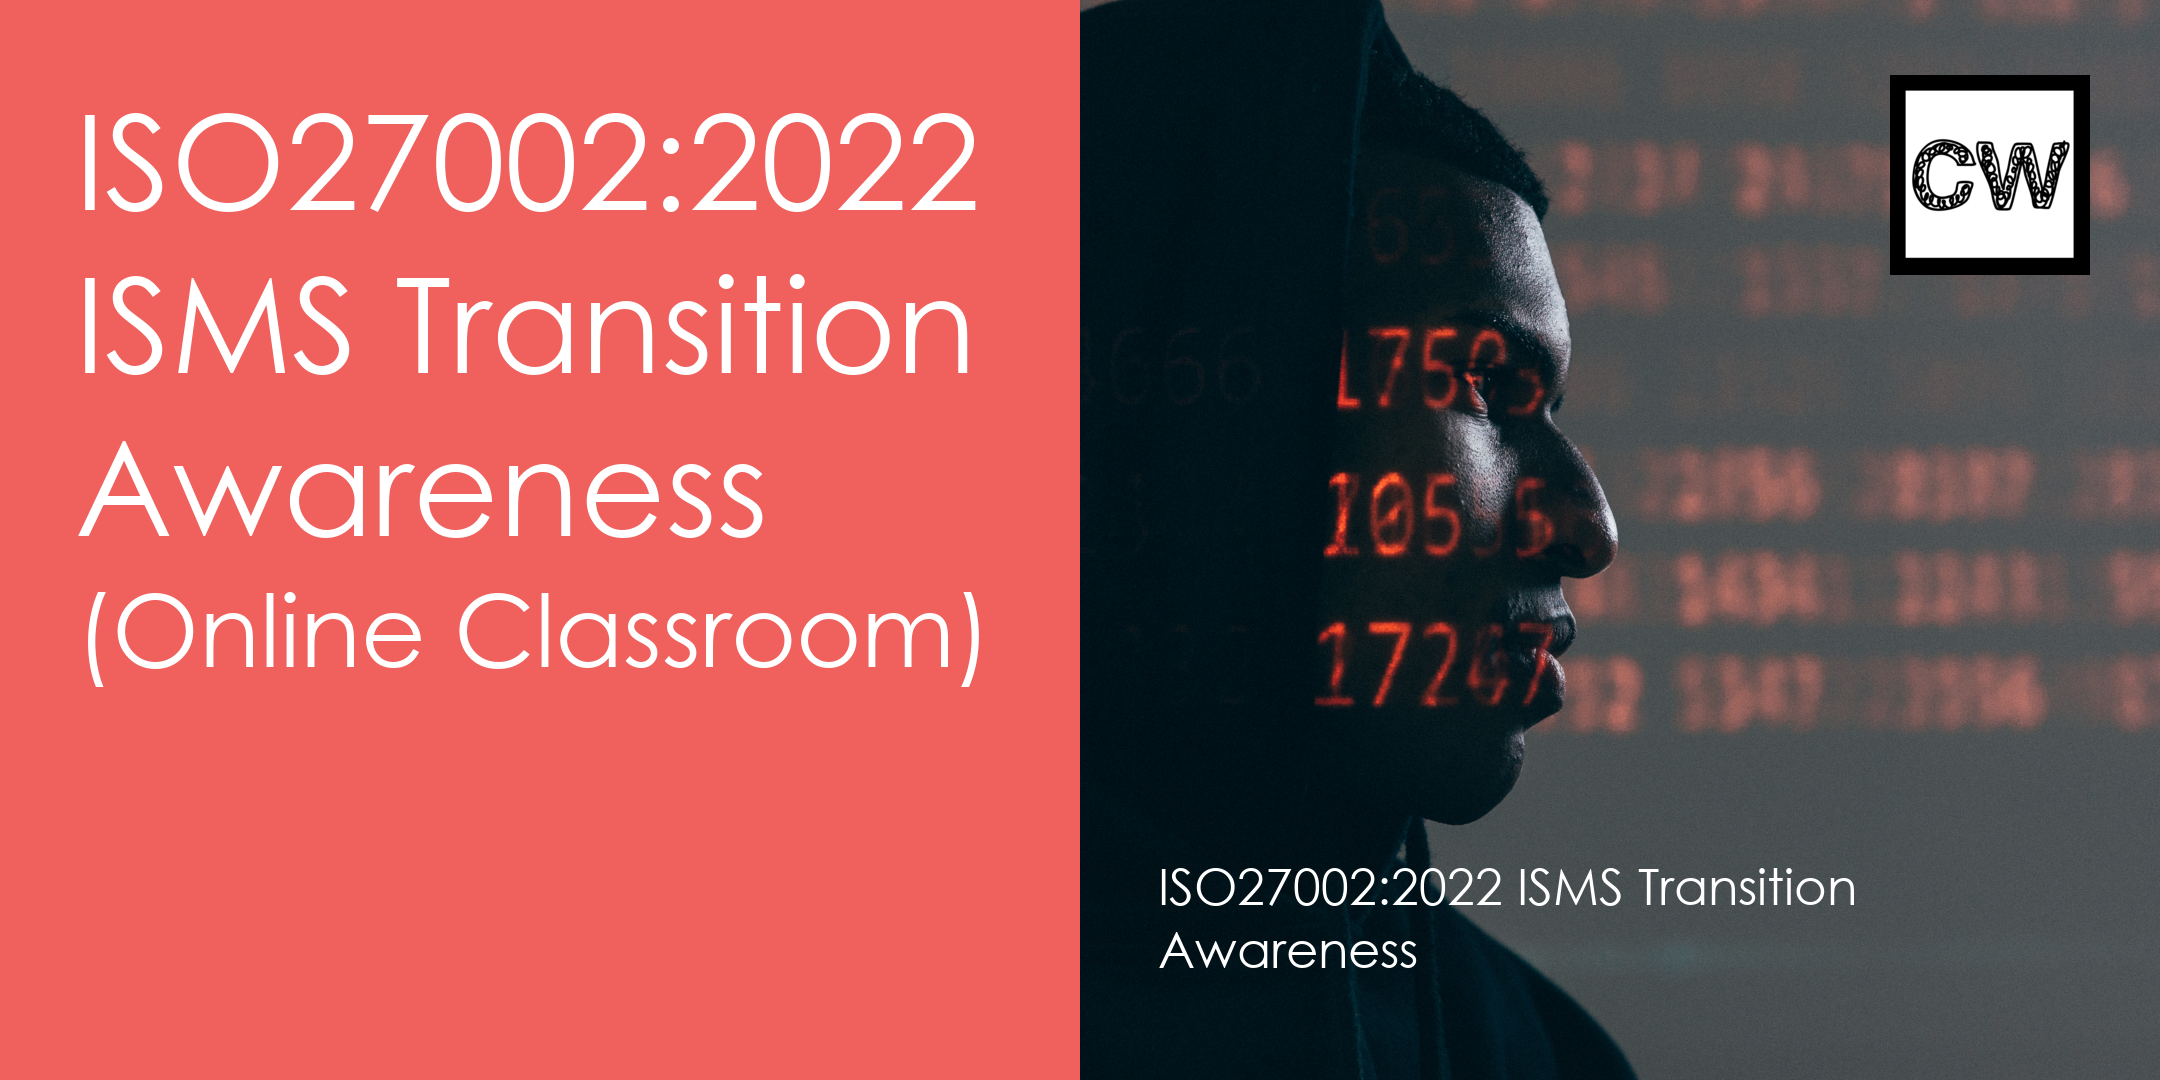 ISO 27002:2022 ISMS Transition Awareness